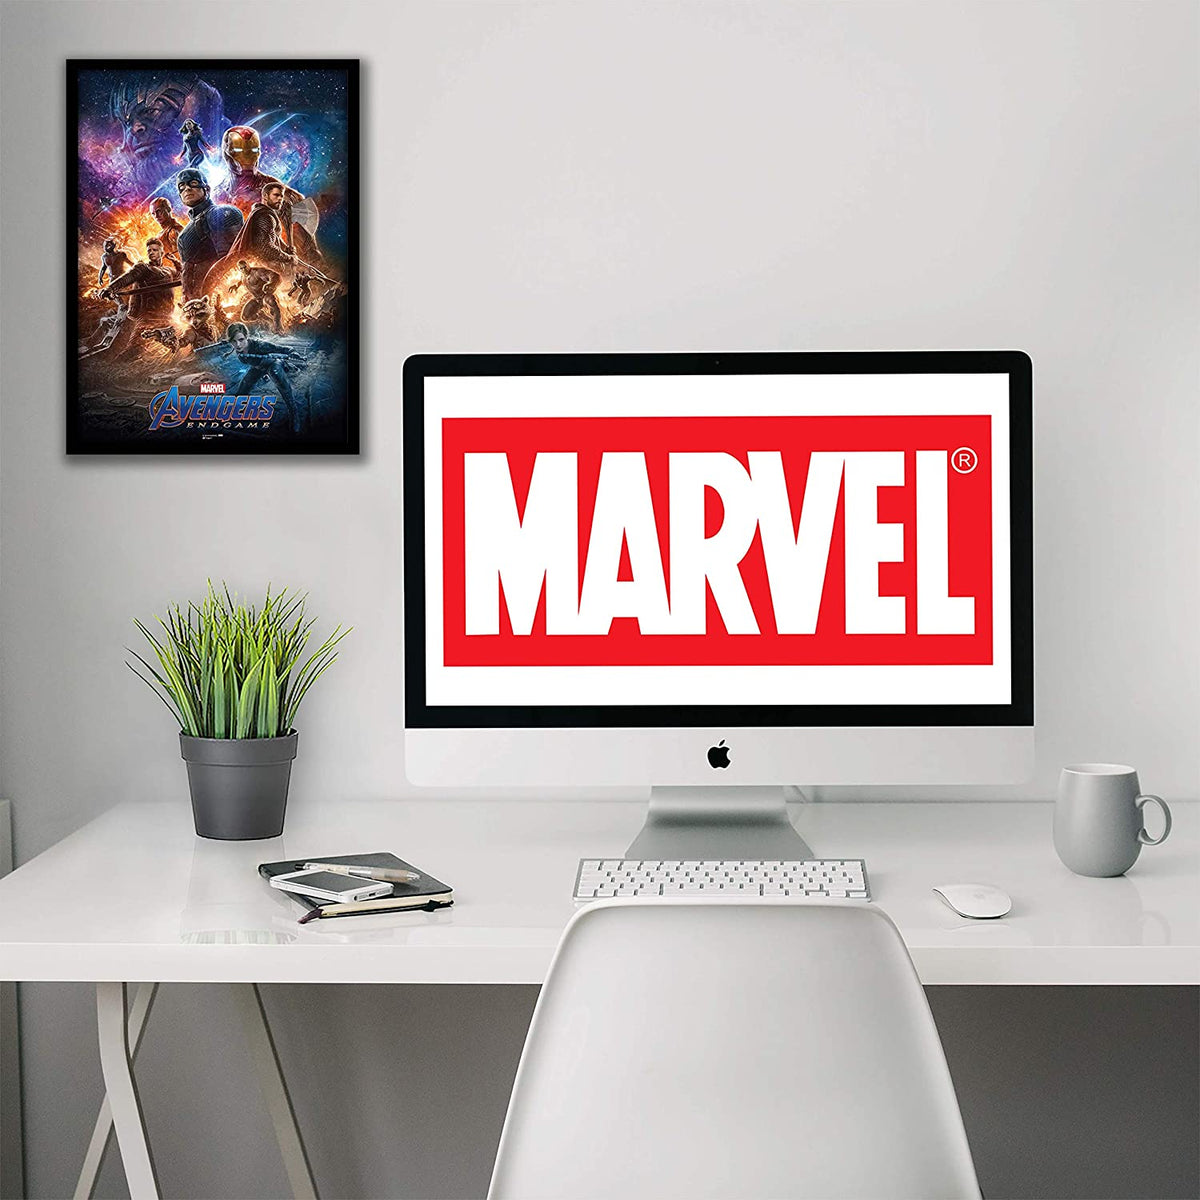 Spidey and His Amazing Friends: Wall Mural - Officially Licensed